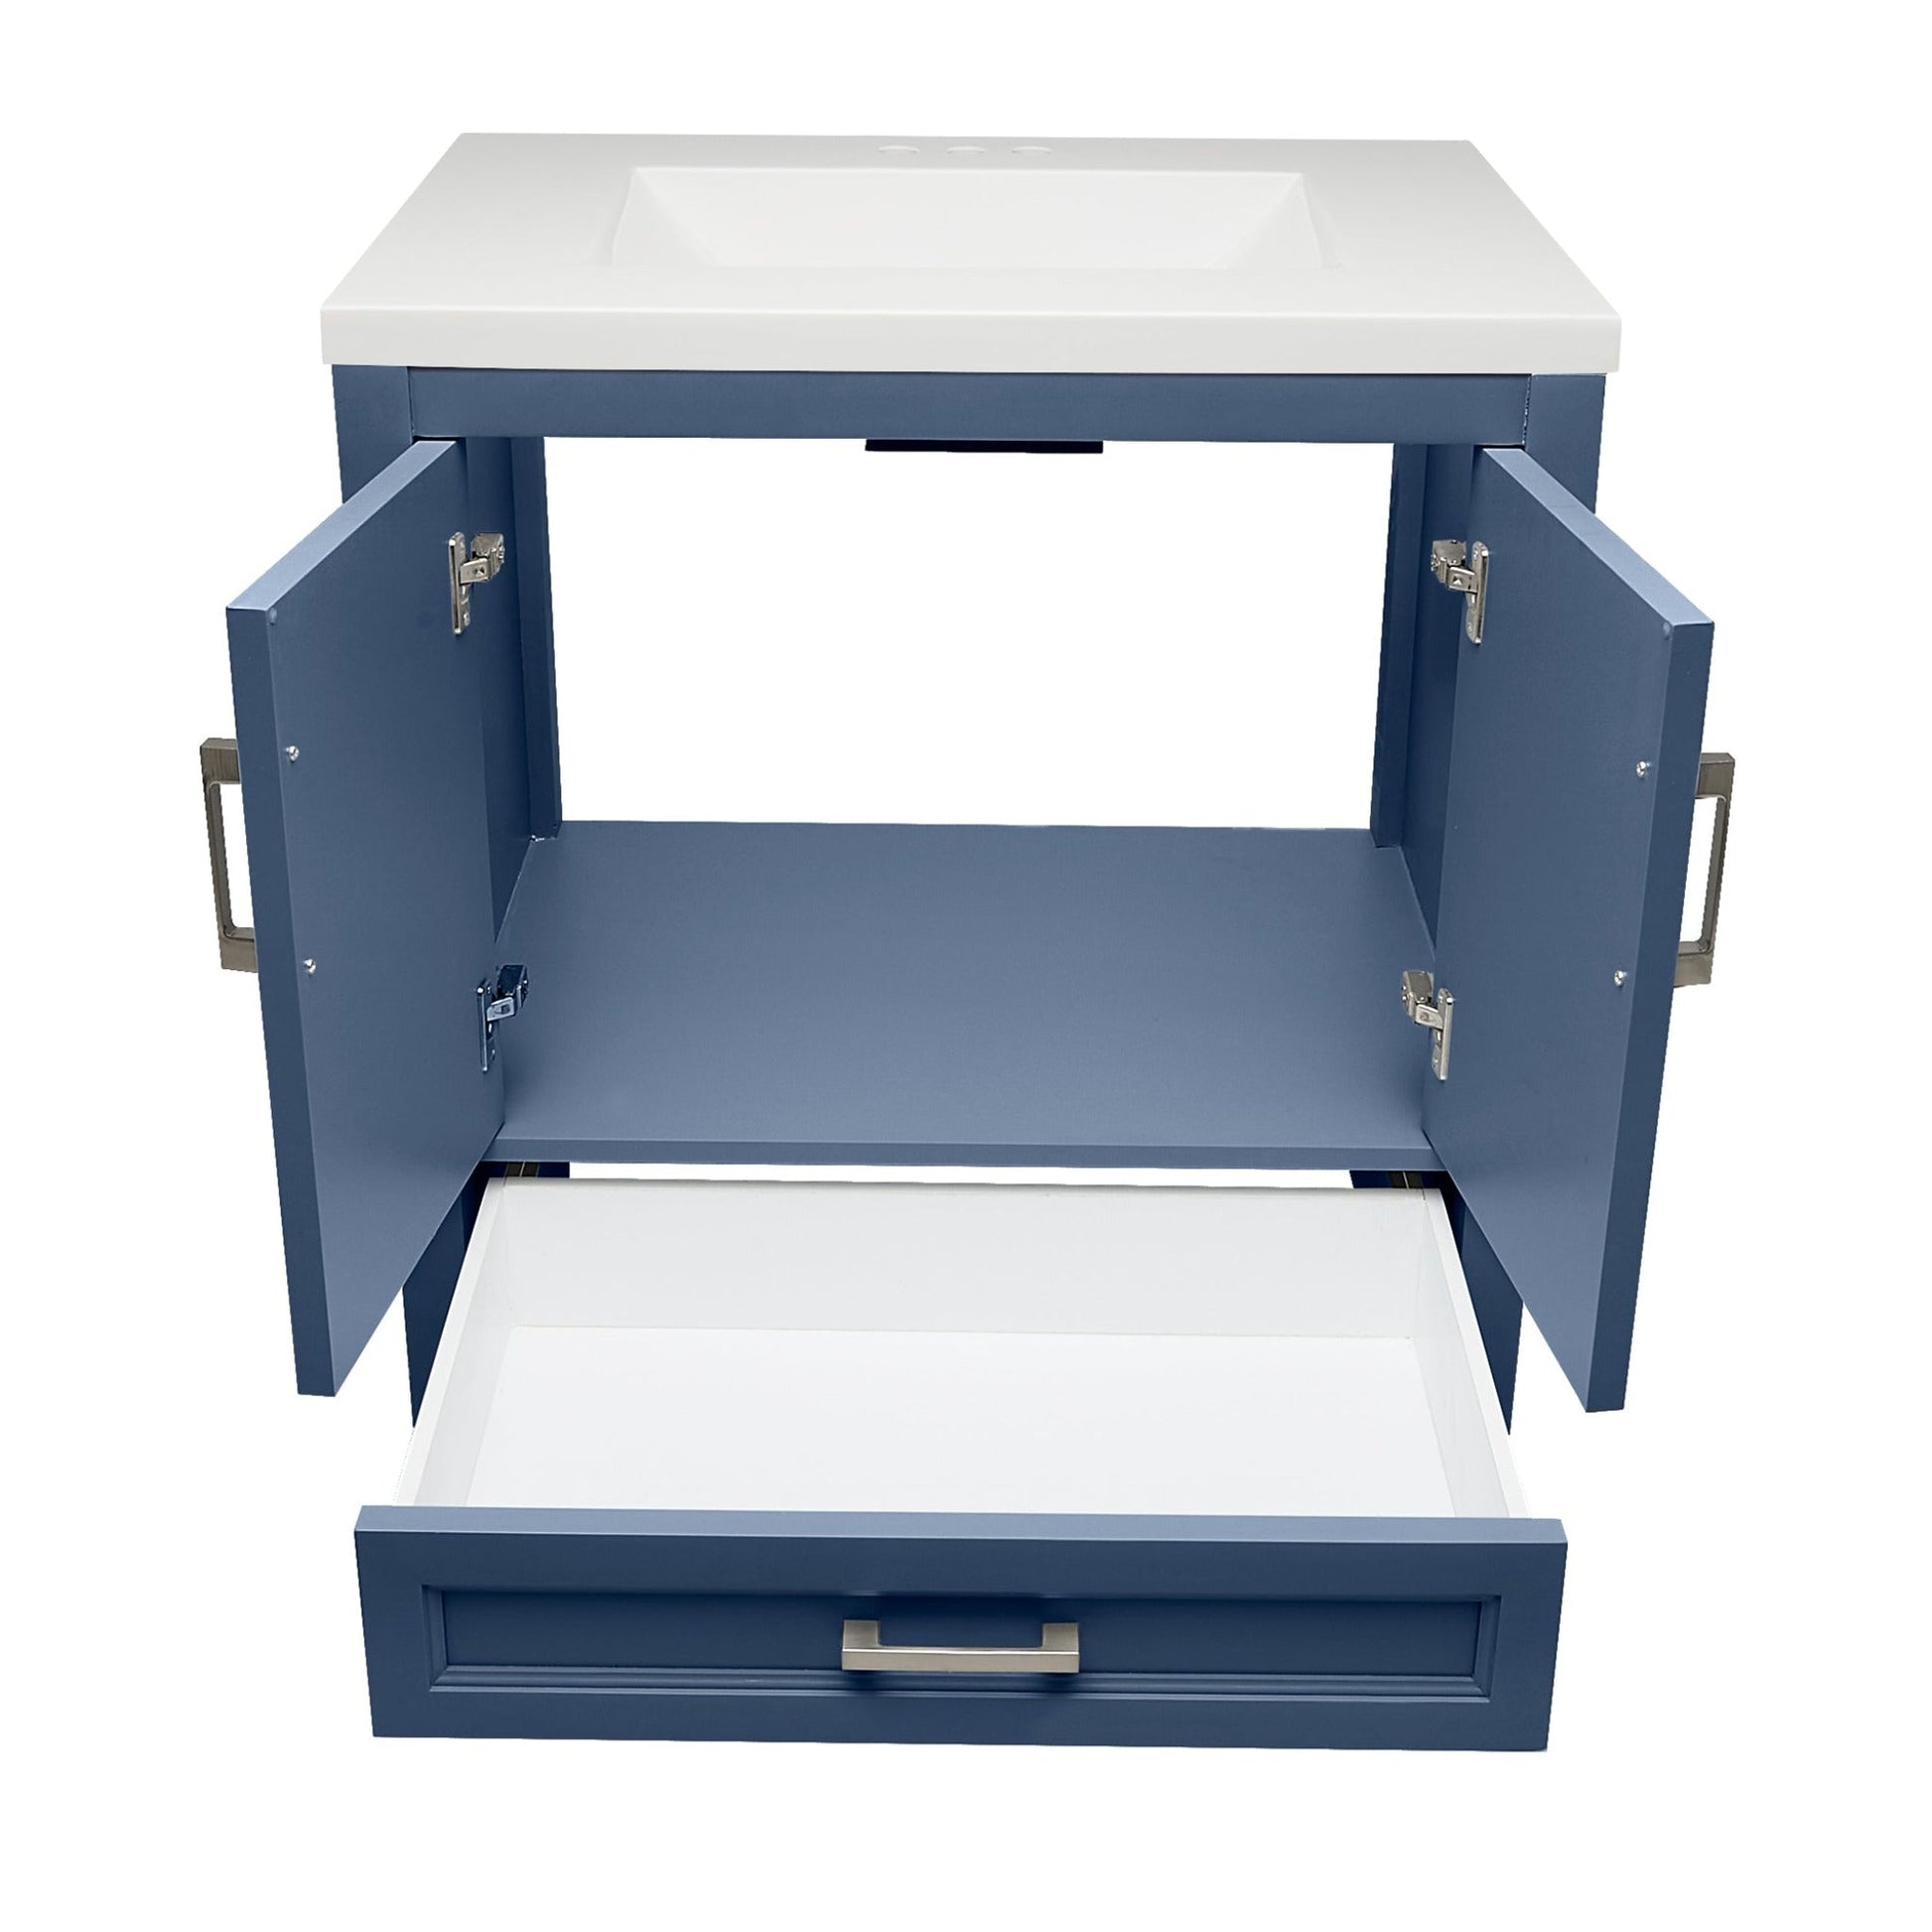 Ella’s Bubbles Nevado 31" Navy Blue Bathroom Vanity With White Cultured Marble Top and Sink